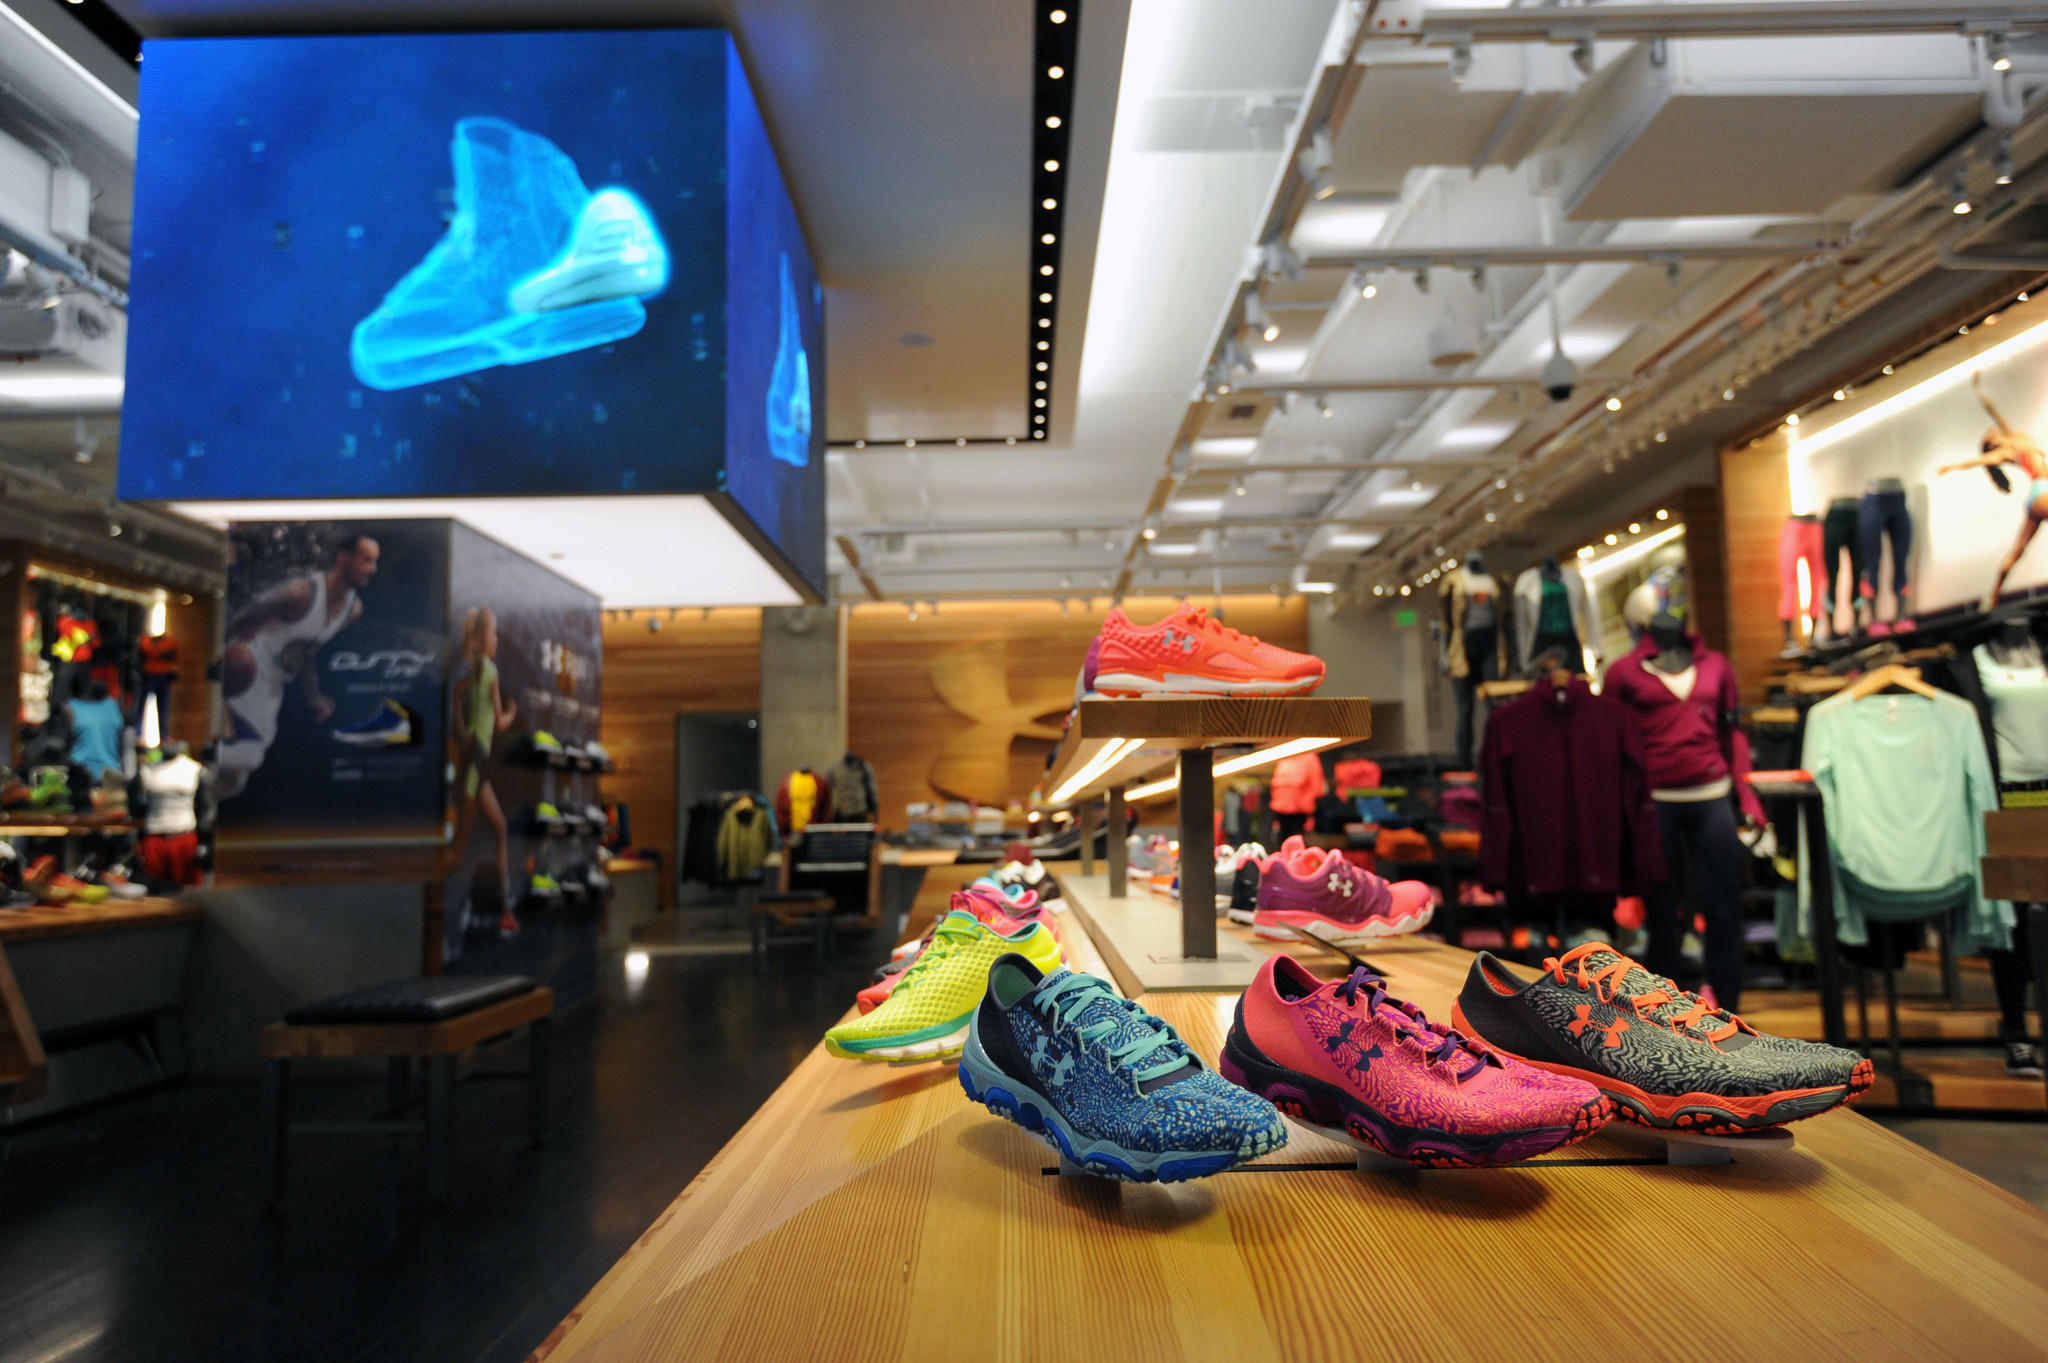 How Under Armour can grow to $7.5B by 